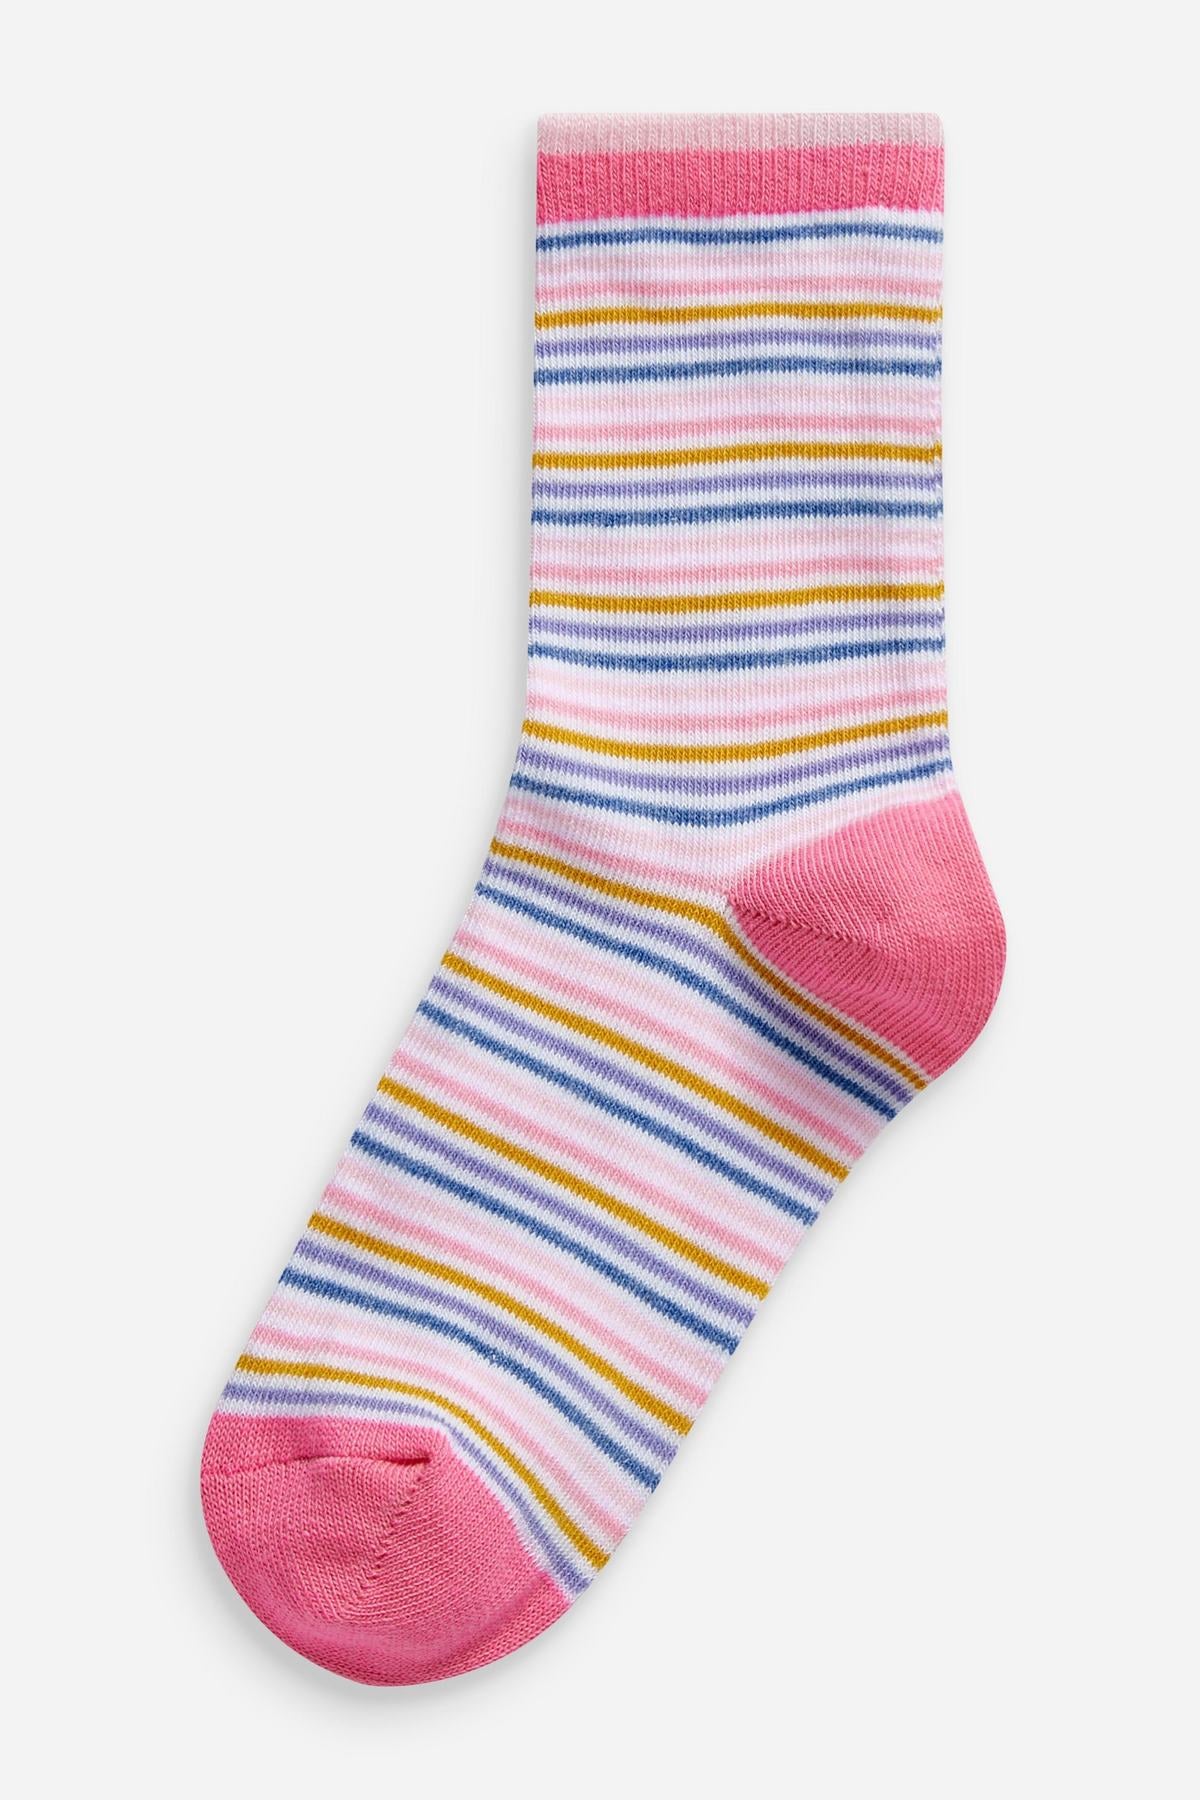 Pink Unicorn 7 Pack Cotton Rich Ankle Socks